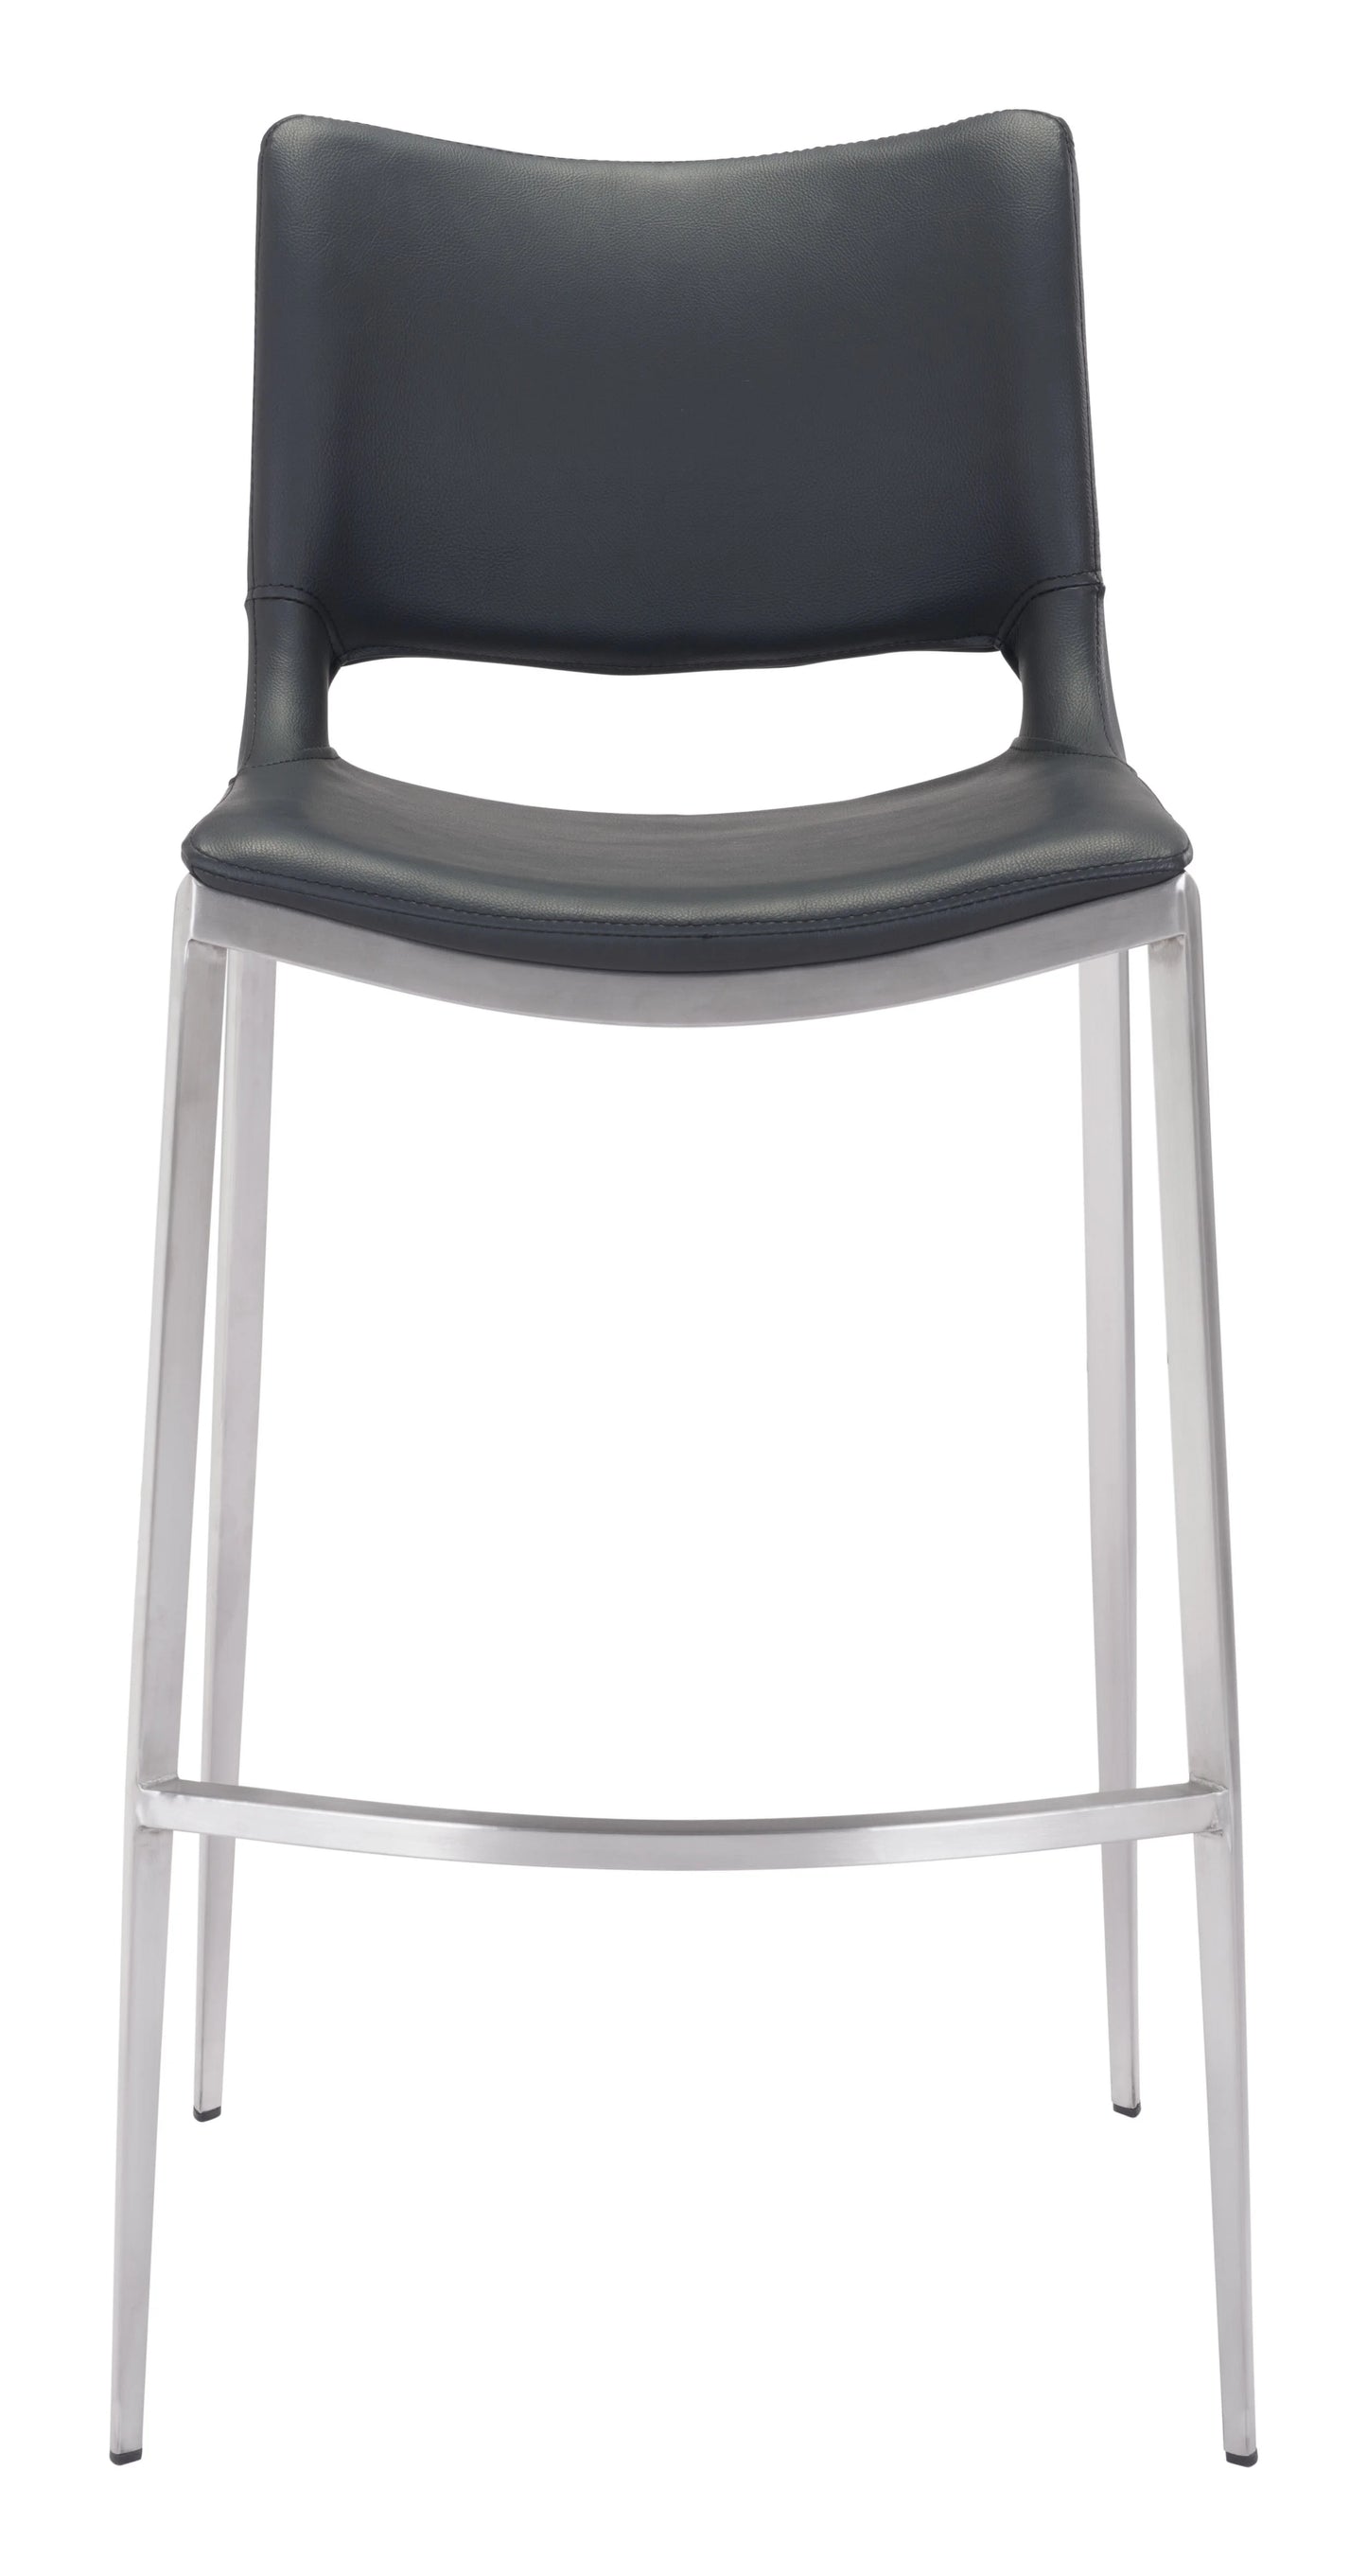 Ace barstool chair front view